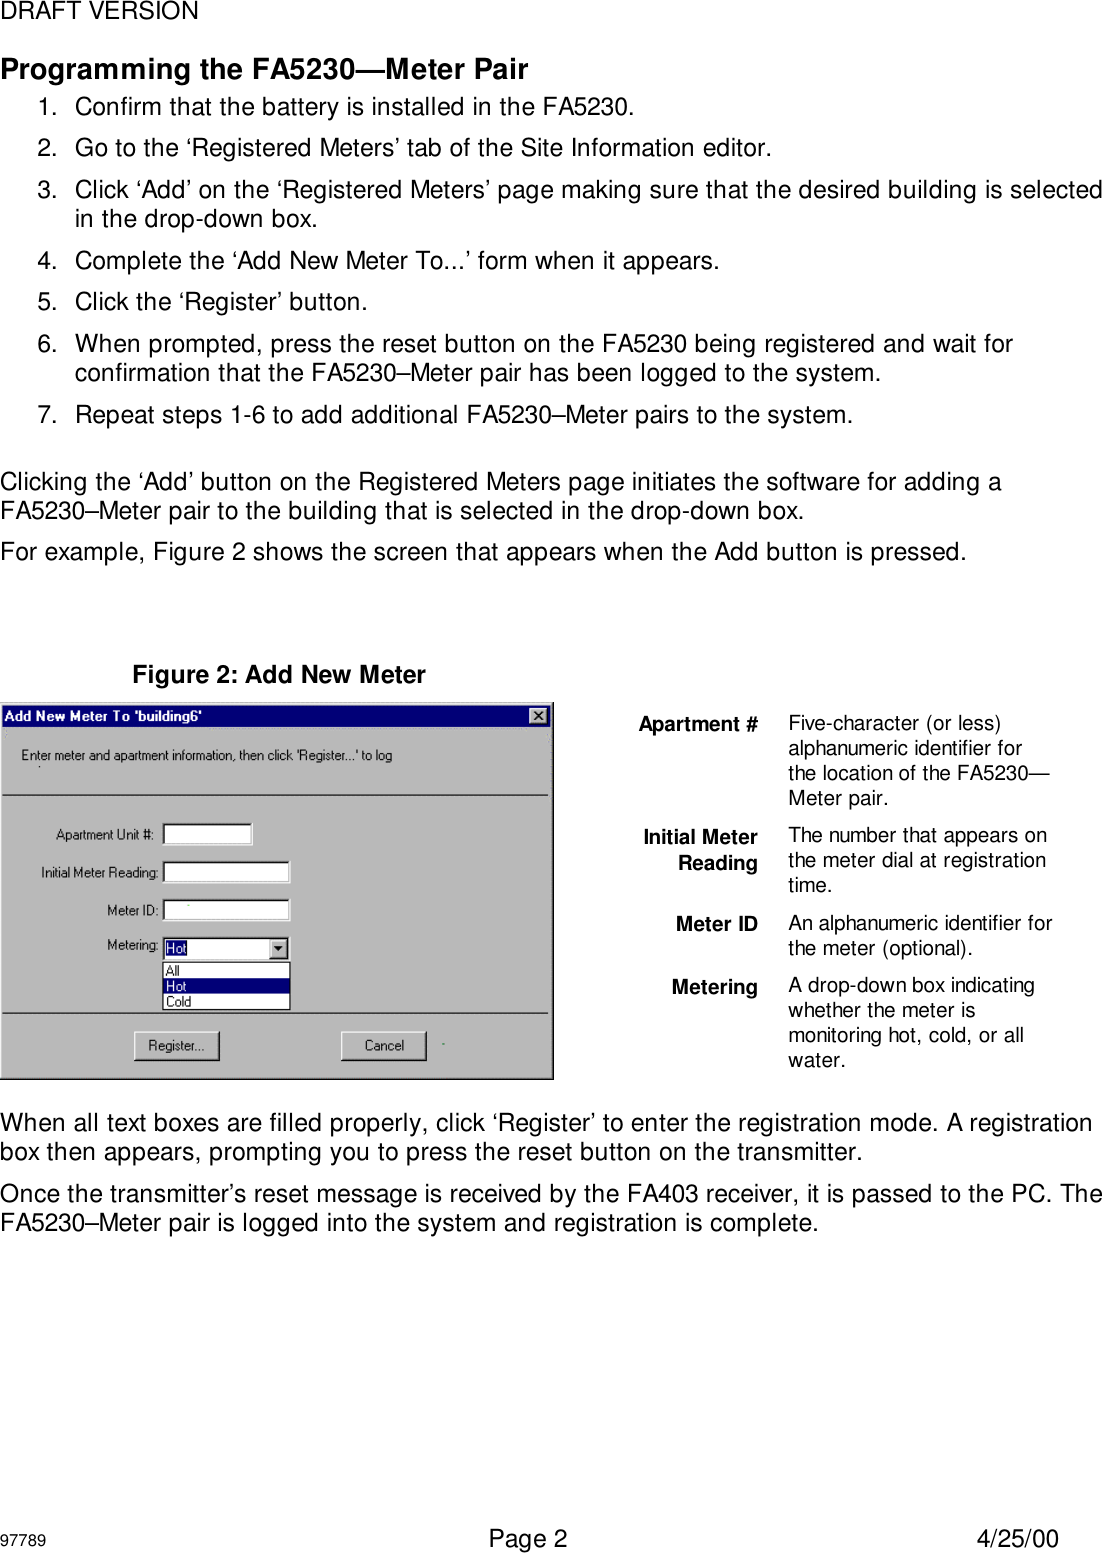 DRAFT VERSION97789  Page 2 4/25/00Programming the FA5230—Meter Pair1.  Confirm that the battery is installed in the FA5230.2.  Go to the ‘Registered Meters’ tab of the Site Information editor.3.  Click ‘Add’ on the ‘Registered Meters’ page making sure that the desired building is selectedin the drop-down box.4.  Complete the ‘Add New Meter To...’ form when it appears.5.  Click the ‘Register’ button.6.  When prompted, press the reset button on the FA5230 being registered and wait forconfirmation that the FA5230–Meter pair has been logged to the system.7.  Repeat steps 1-6 to add additional FA5230–Meter pairs to the system.Clicking the ‘Add’ button on the Registered Meters page initiates the software for adding aFA5230–Meter pair to the building that is selected in the drop-down box.For example, Figure 2 shows the screen that appears when the Add button is pressed.When all text boxes are filled properly, click ‘Register’ to enter the registration mode. A registrationbox then appears, prompting you to press the reset button on the transmitter.Once the transmitter’s reset message is received by the FA403 receiver, it is passed to the PC. TheFA5230–Meter pair is logged into the system and registration is complete.Figure 2: Add New MeterApartment # Five-character (or less)alphanumeric identifier forthe location of the FA5230—Meter pair.Initial MeterReadingThe number that appears onthe meter dial at registrationtime.Meter ID An alphanumeric identifier forthe meter (optional).Metering A drop-down box indicatingwhether the meter ismonitoring hot, cold, or allwater.